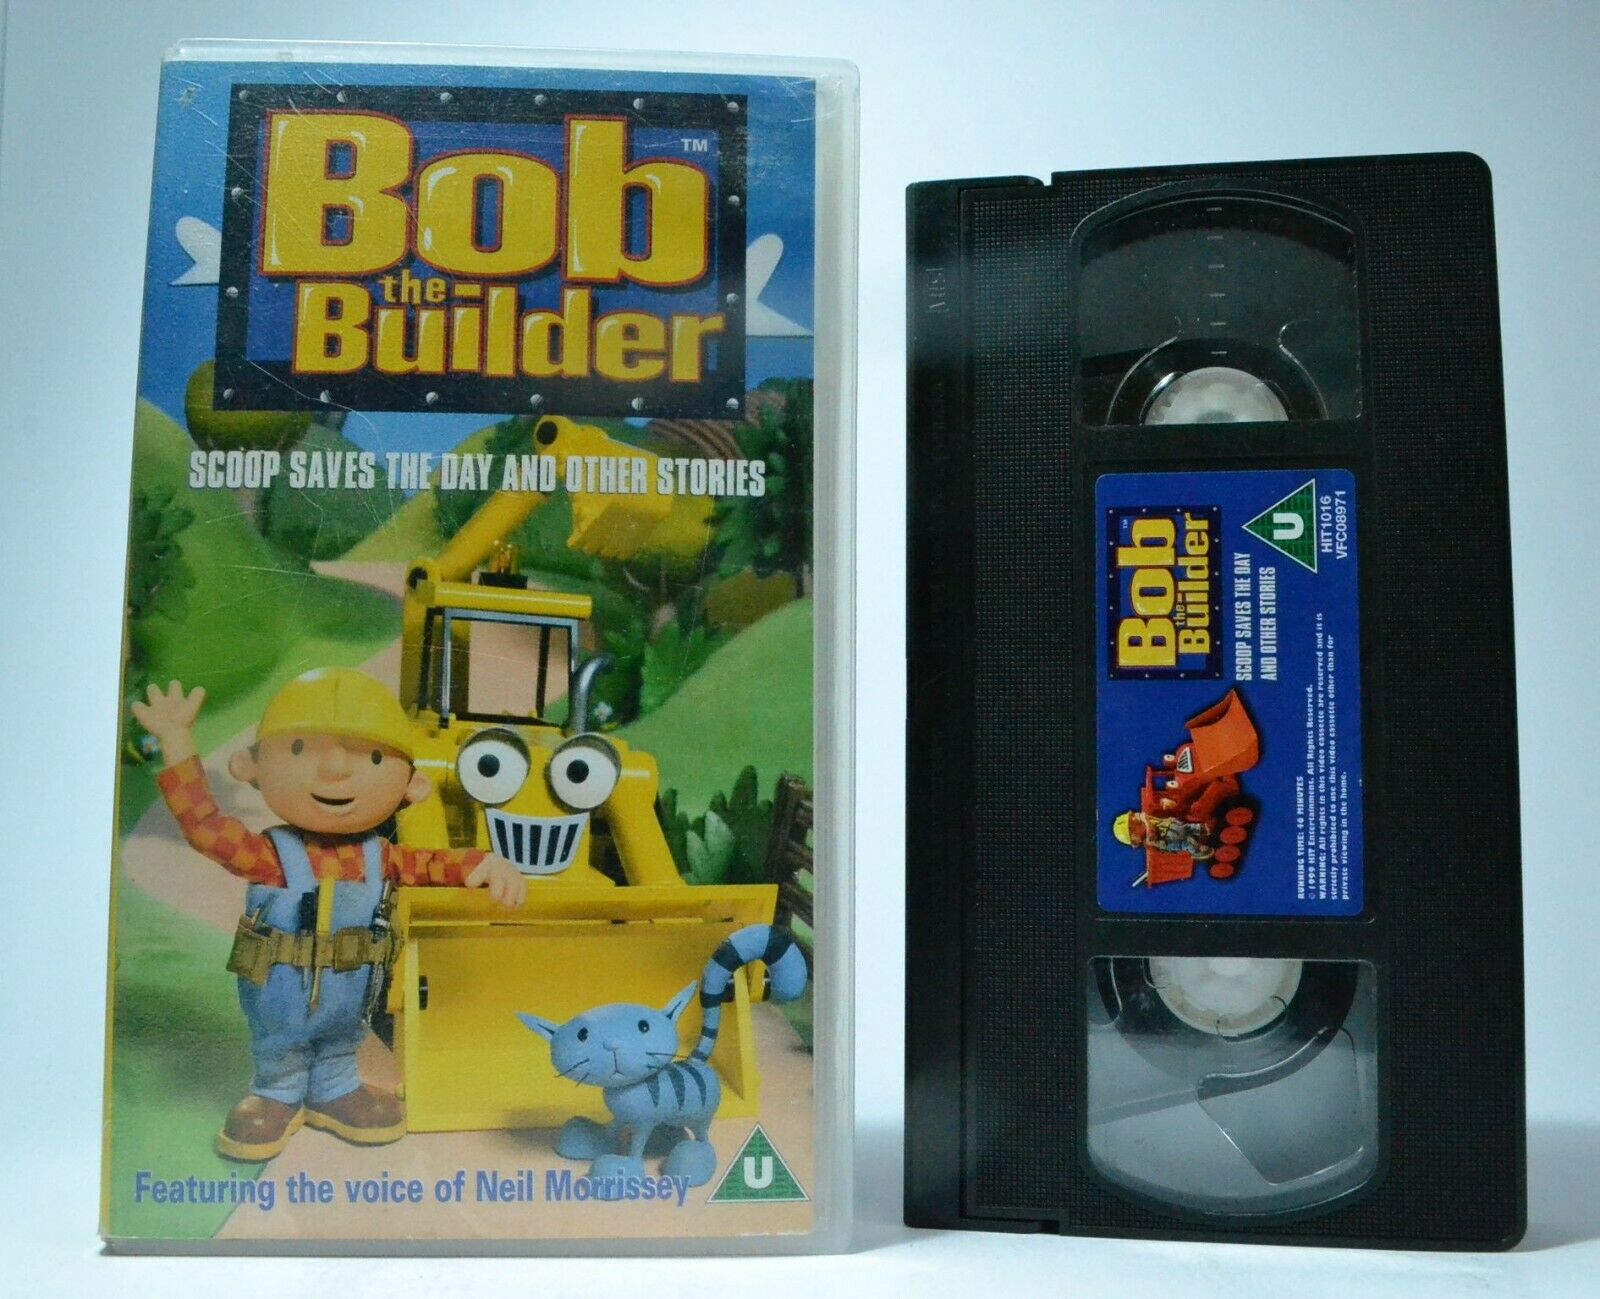 Bob The Builder Cartoon Sex Porn - Bob The Builder, Scoop Saves The Day, Animated, Adventures, Childrens, VHS  â€“ Golden Class Movies LTD